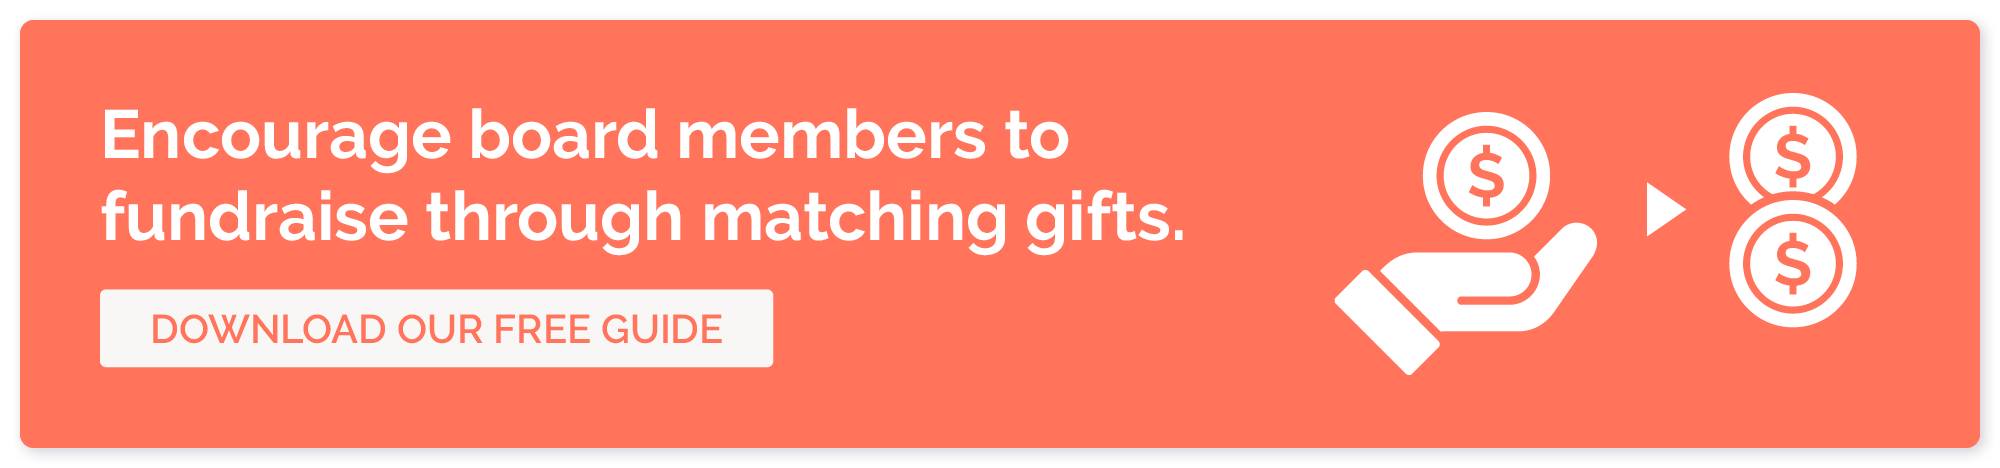 Click to download our guide to matching gifts to learn how to engage board members in fundraising.